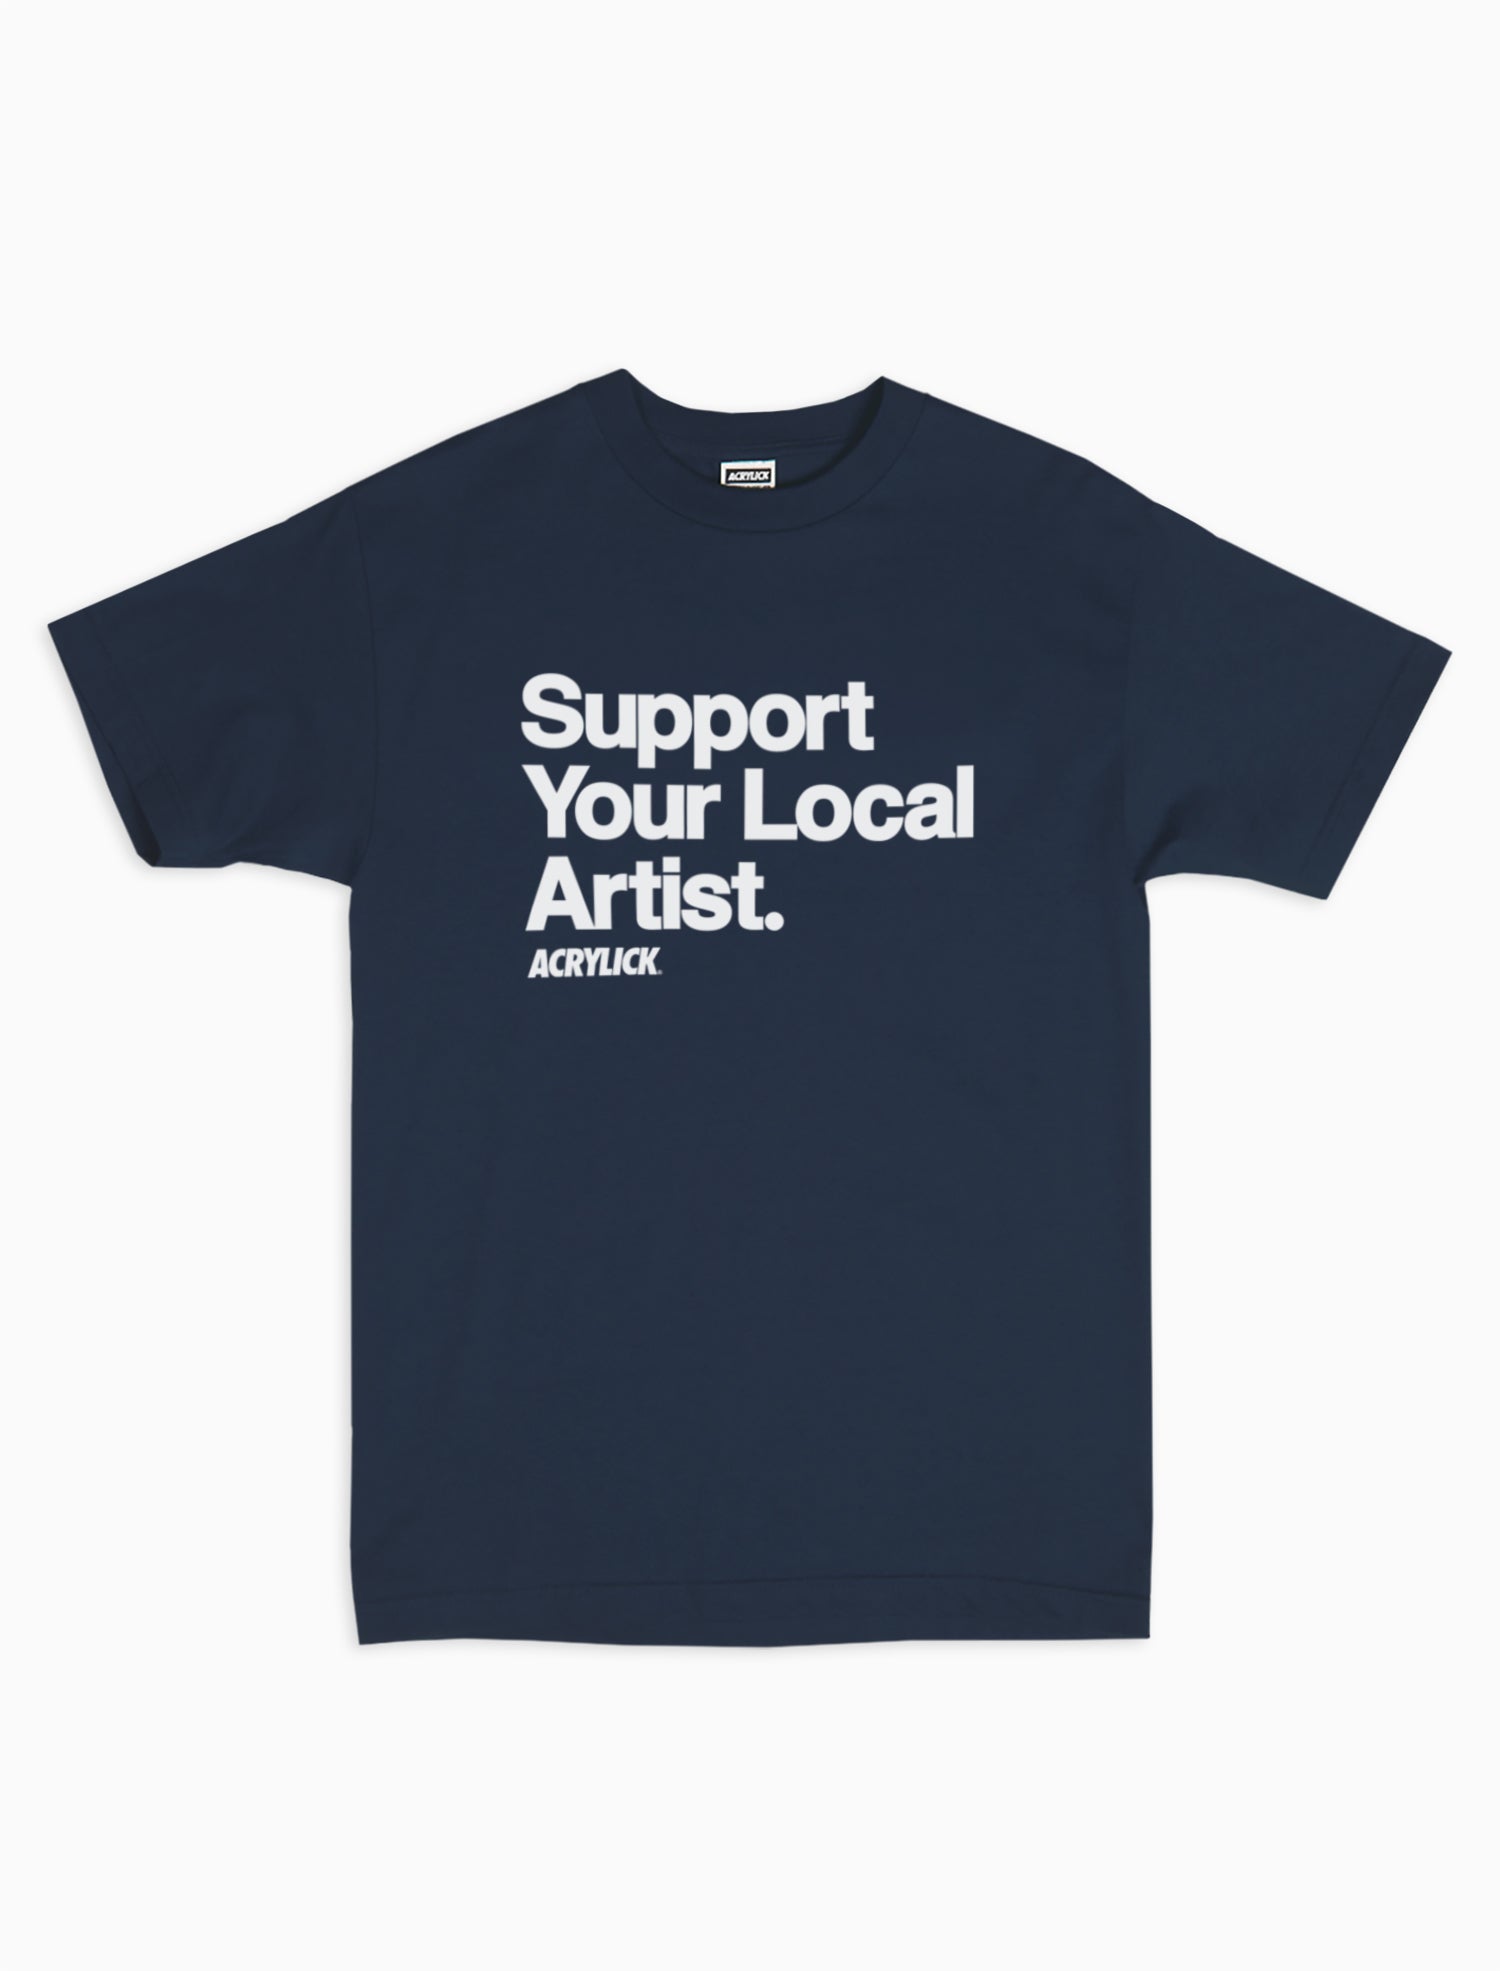 Acrylick Goods - Support Your Local Artist Tee - Available in Heather Grey and Navy Tees